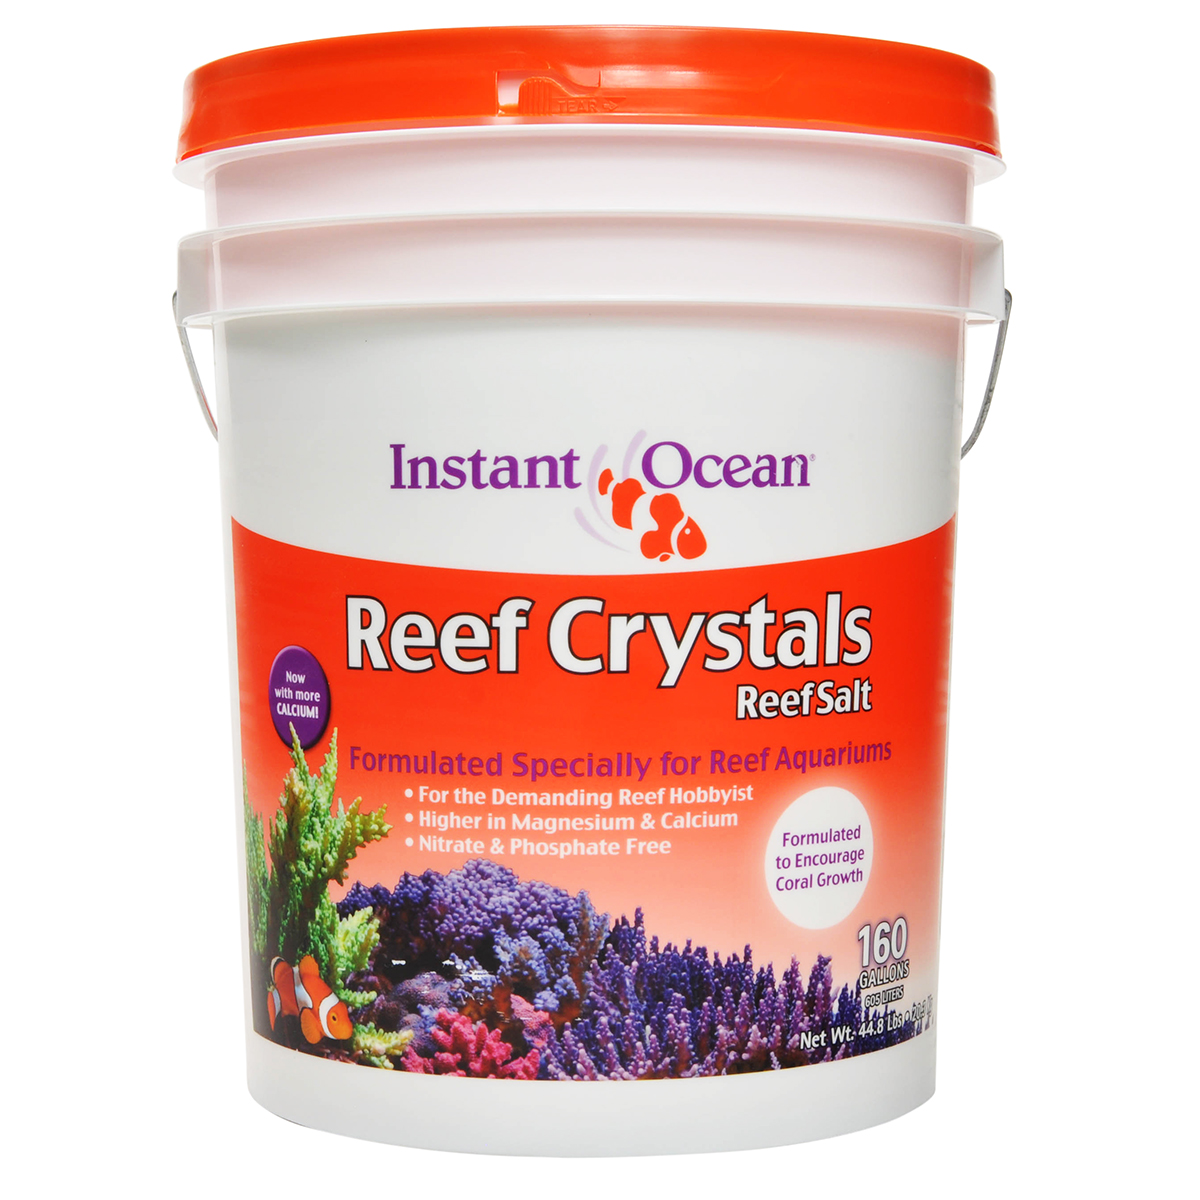 reef crystals mixing instructions